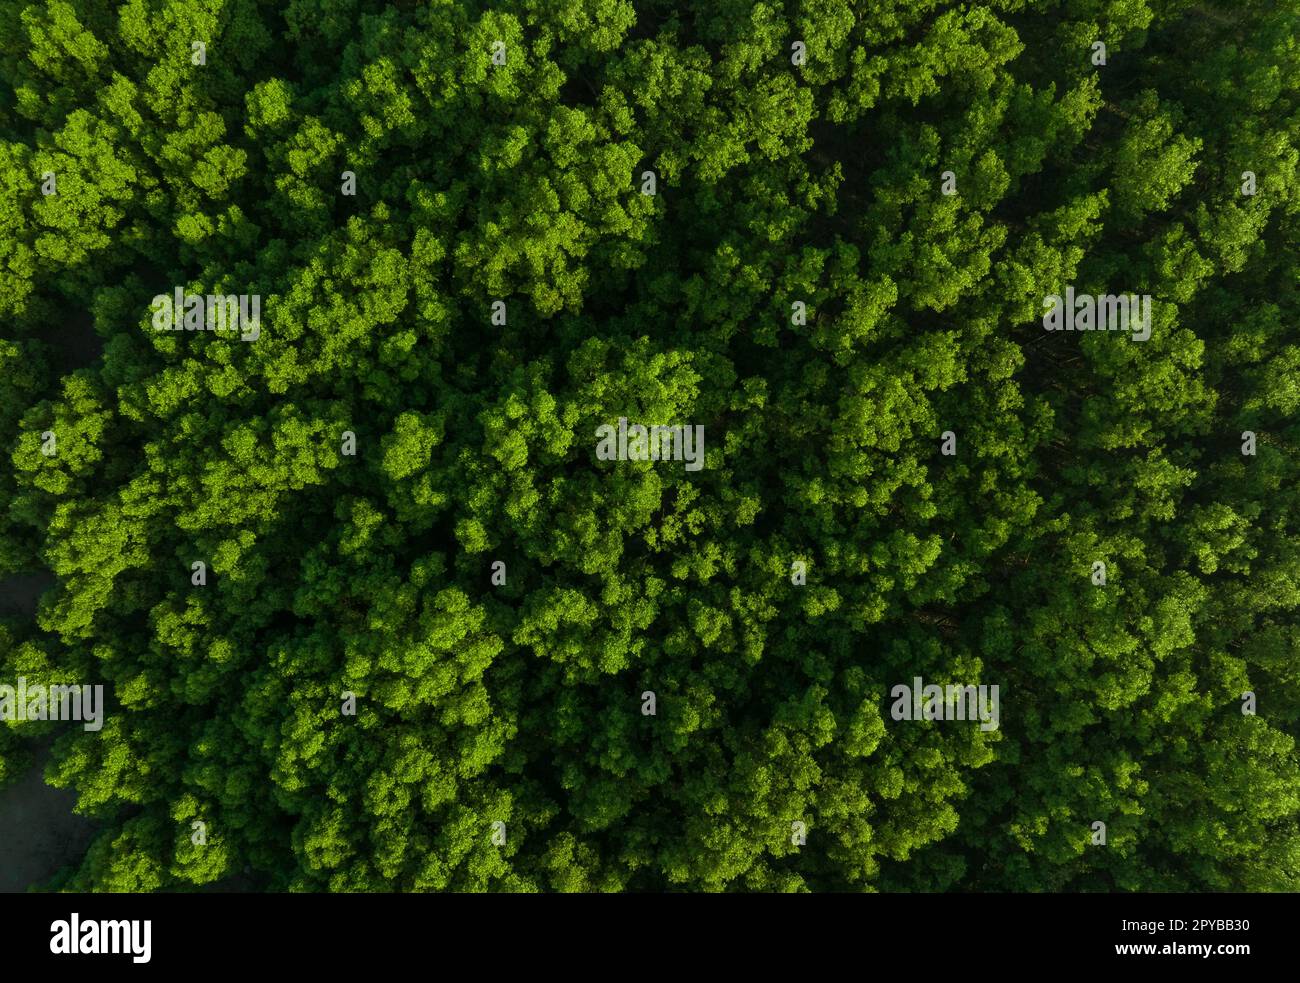 Aerial top view of mangrove forest. Drone view of dense green mangrove trees captures CO2. Green trees background for carbon neutrality and net zero emissions concept. Sustainable green environment. Stock Photo